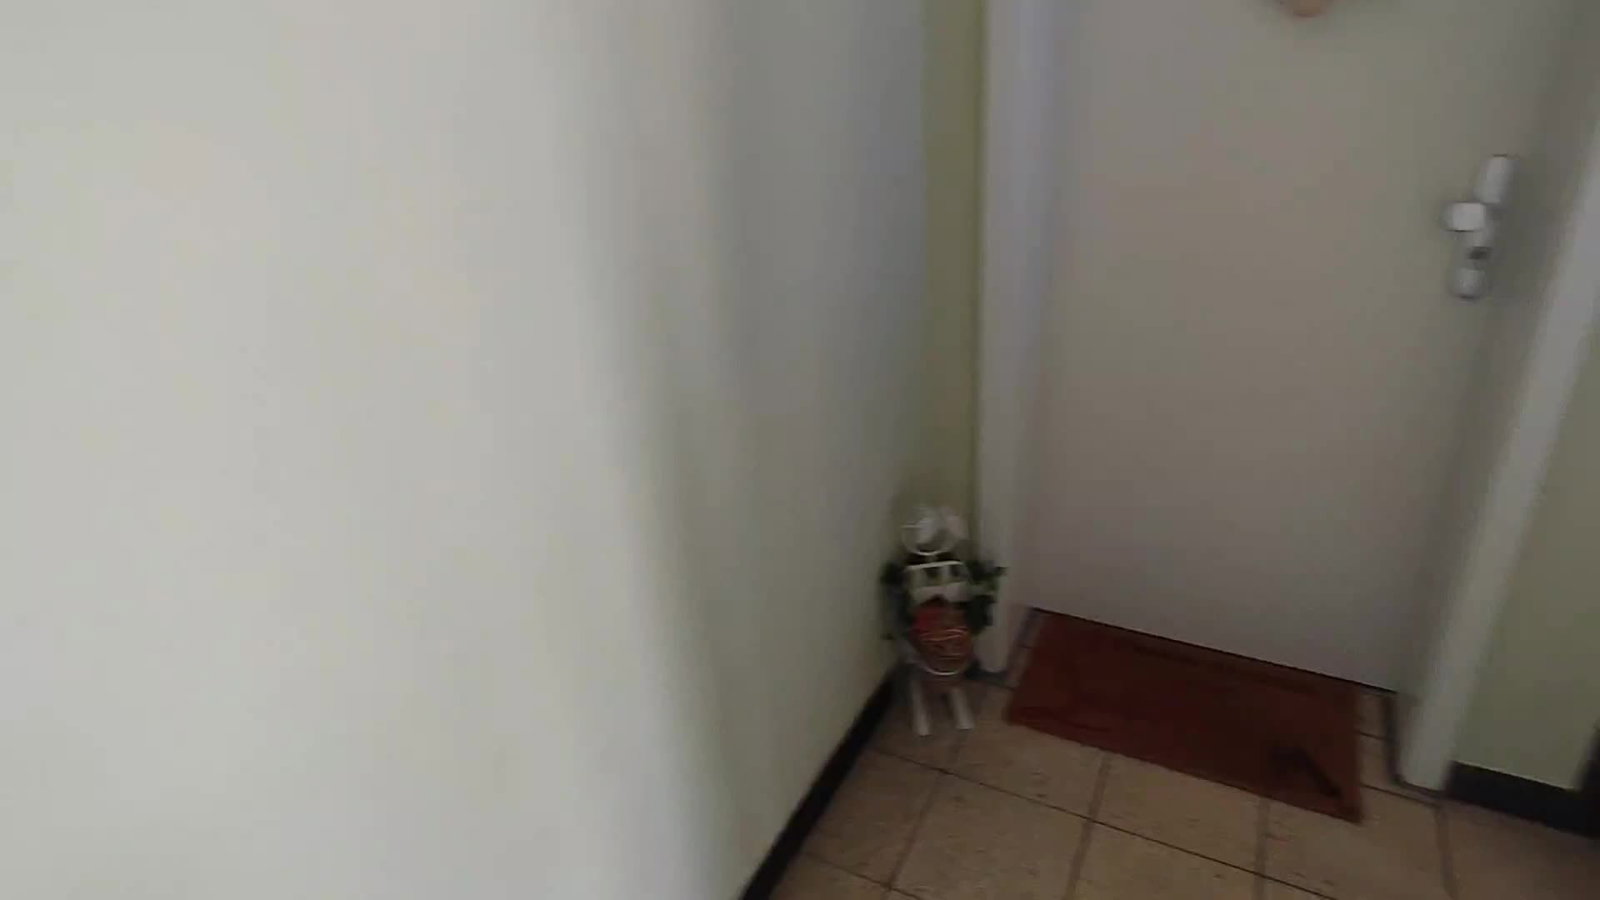 Video by HornyGerman2k with the username @HornyGerman2k, who is a verified user,  April 21, 2022 at 8:56 AM and the text says '#horny #guy #masturbating in #public stairwell of my apartment building.

#gay #solo #cum'